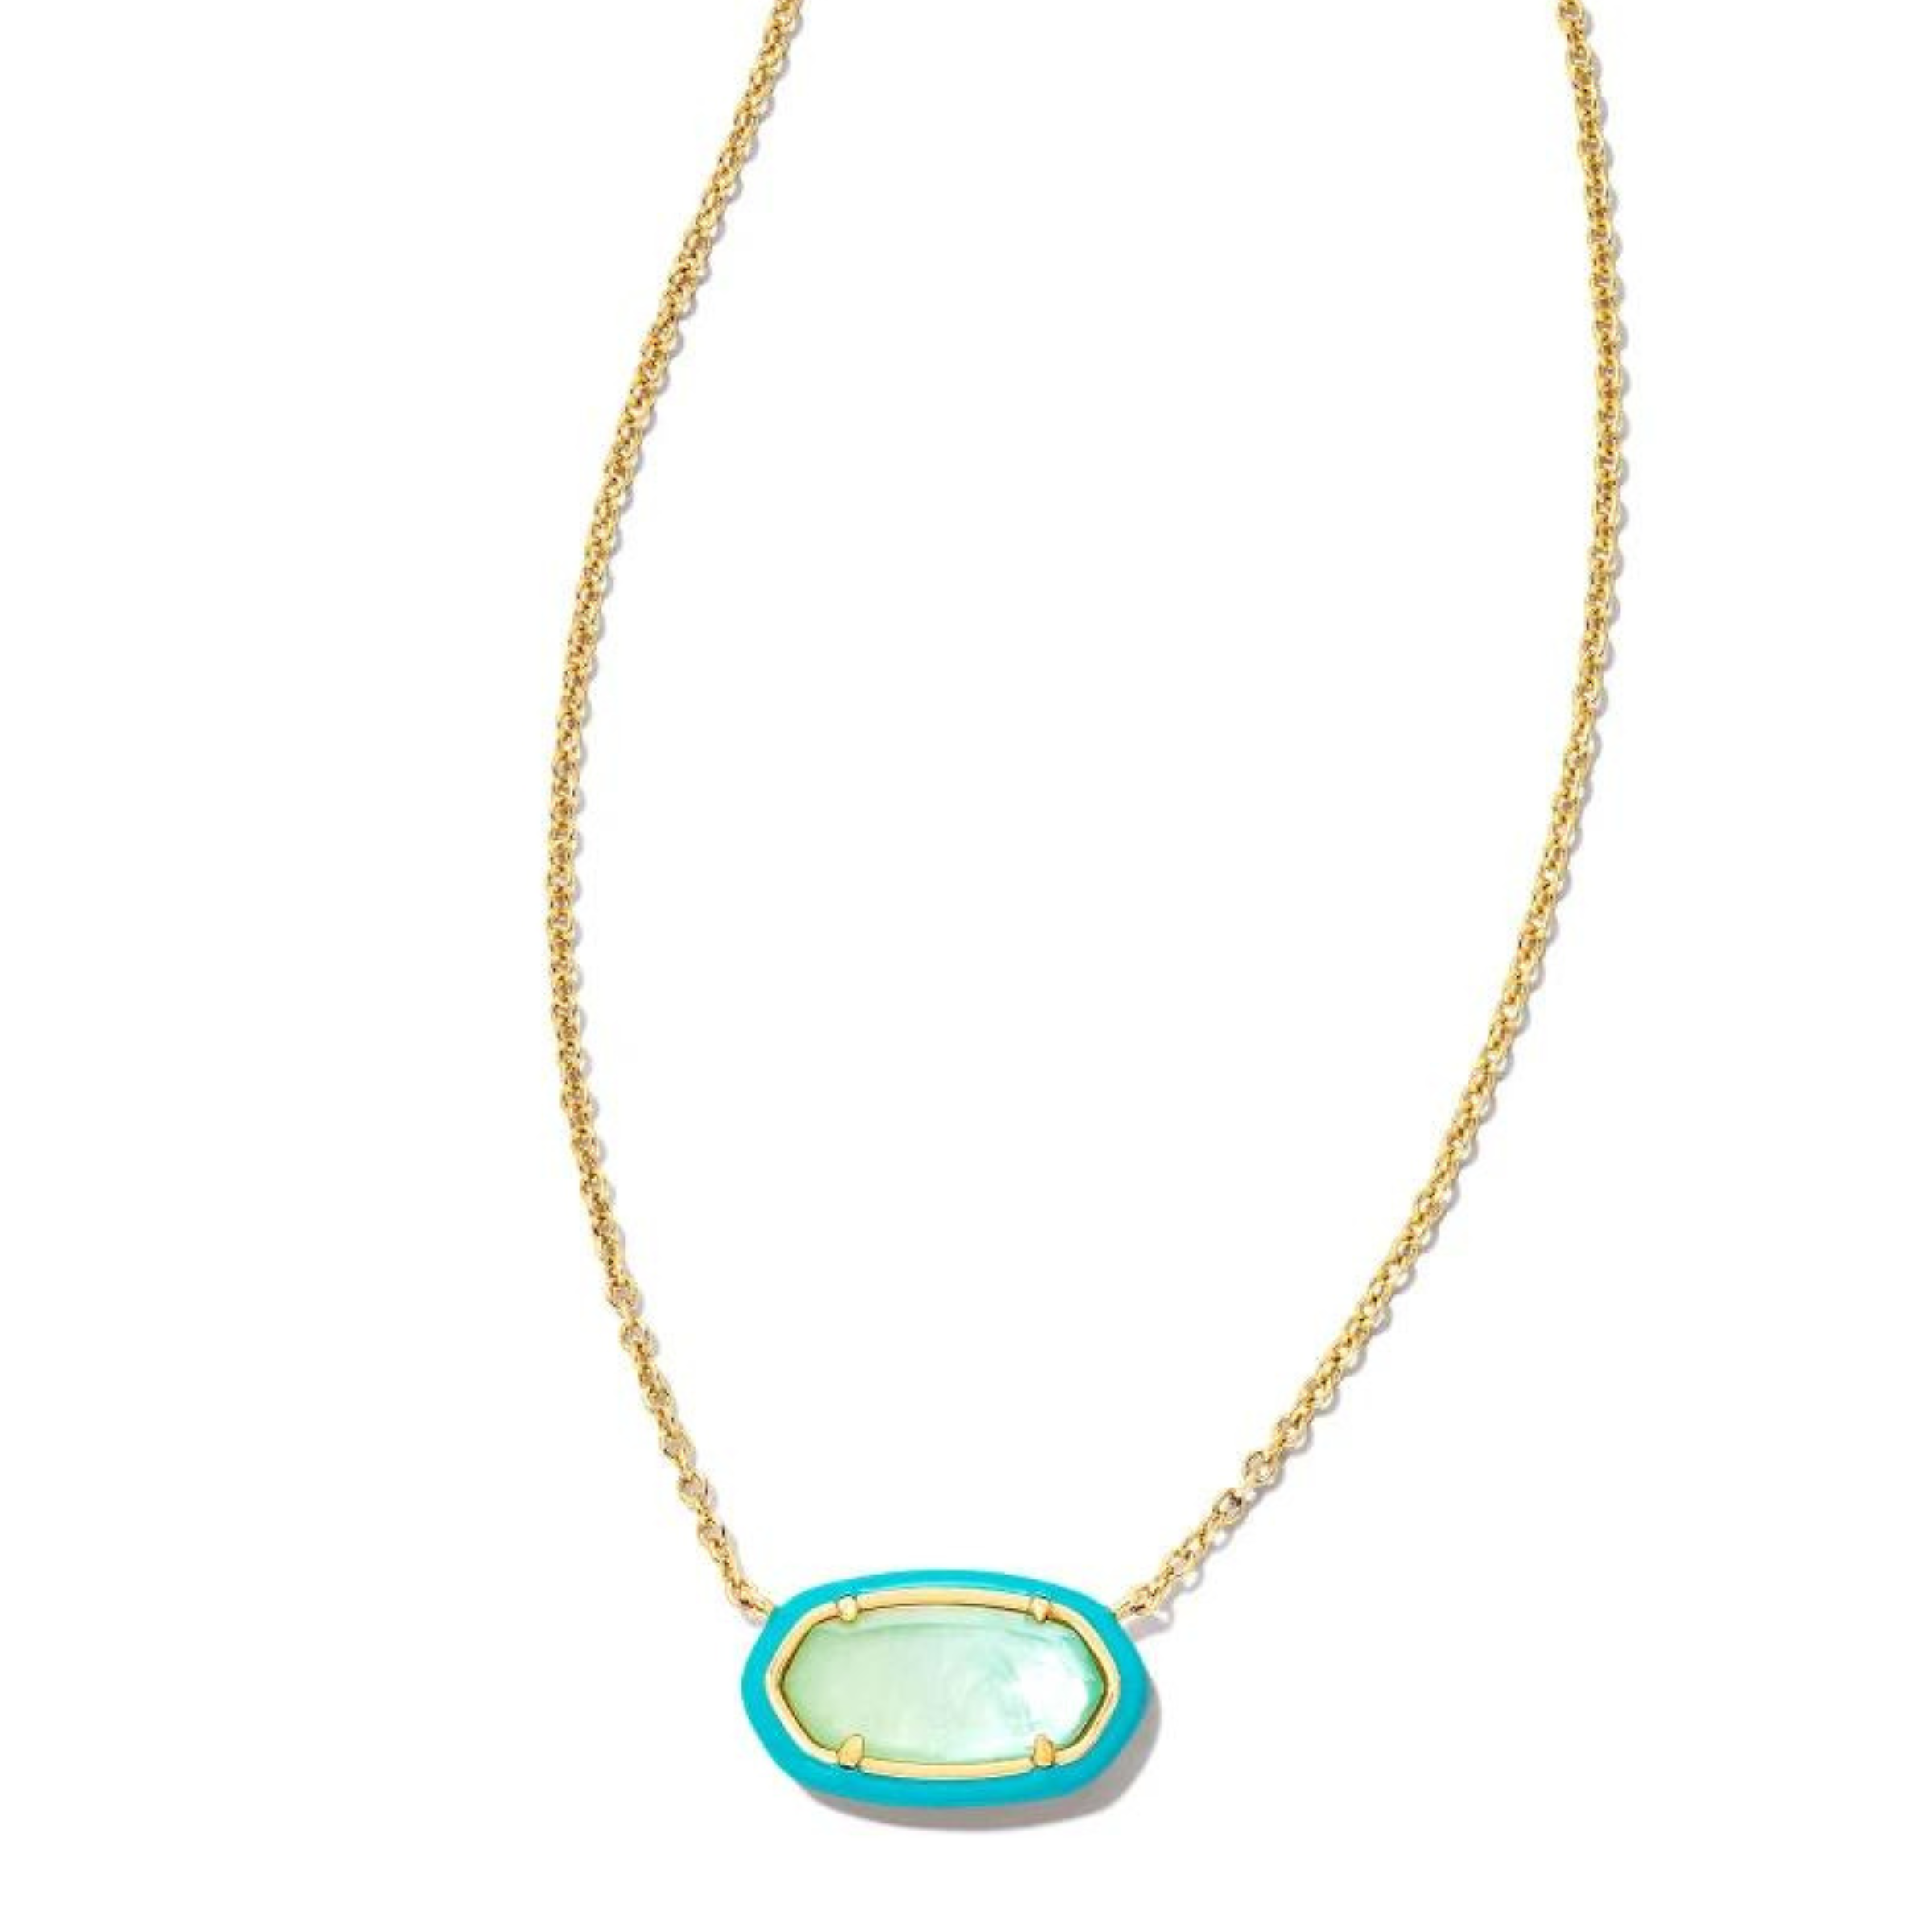 Pictured on a white background is a gold chain necklace with an oval pendant. This pendant is turquoise and gold.  